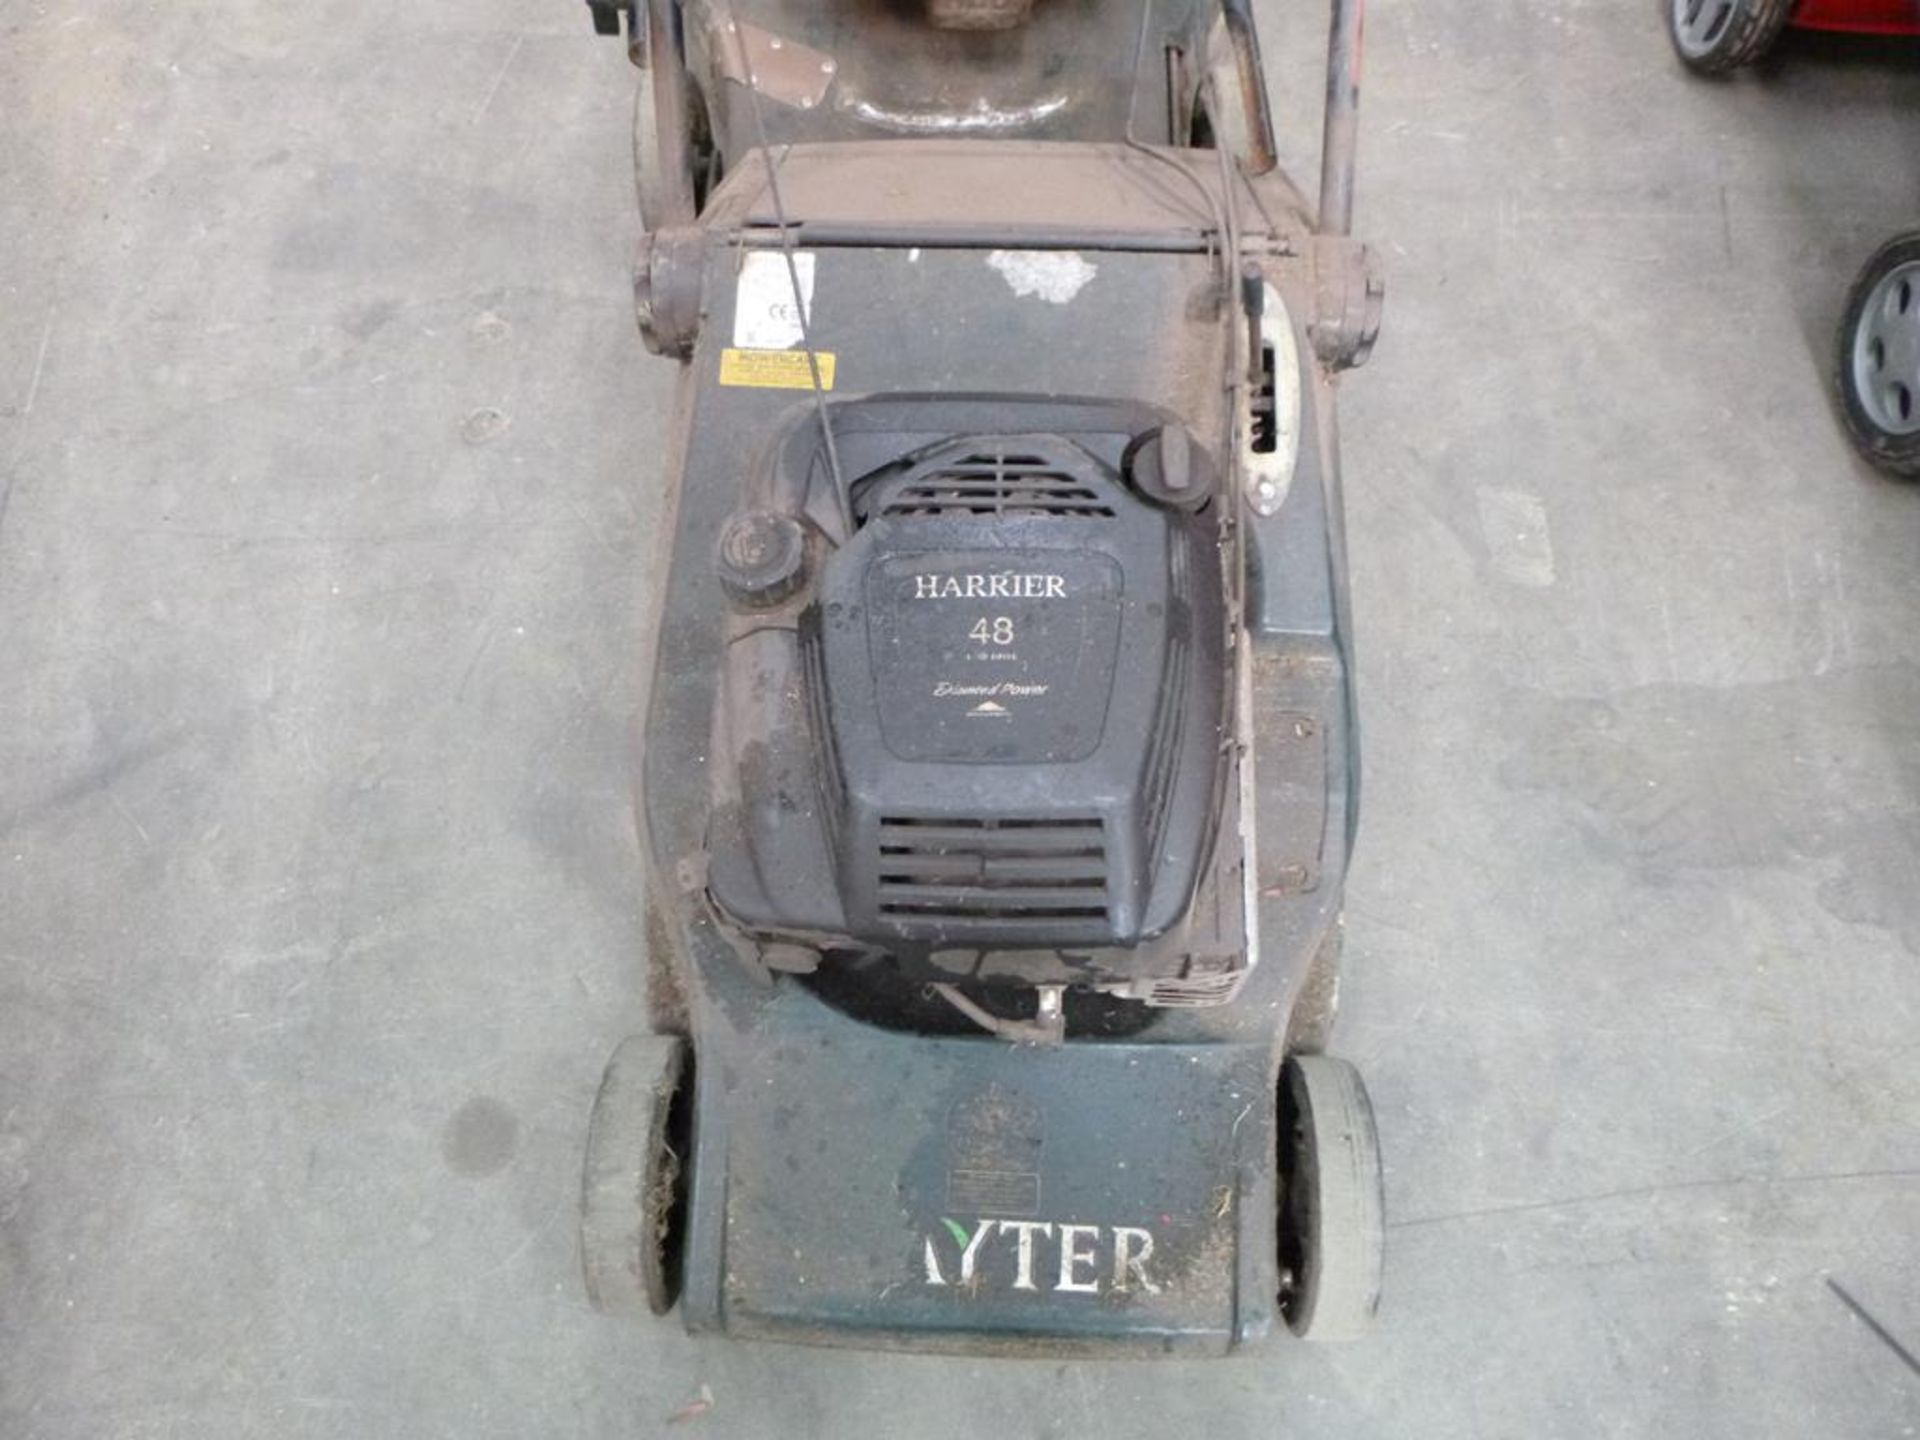 Two Trade In Lawnmowers. One Hayter Harrier 48 and one Hayter Harrier 56 (A/F) - Image 5 of 6